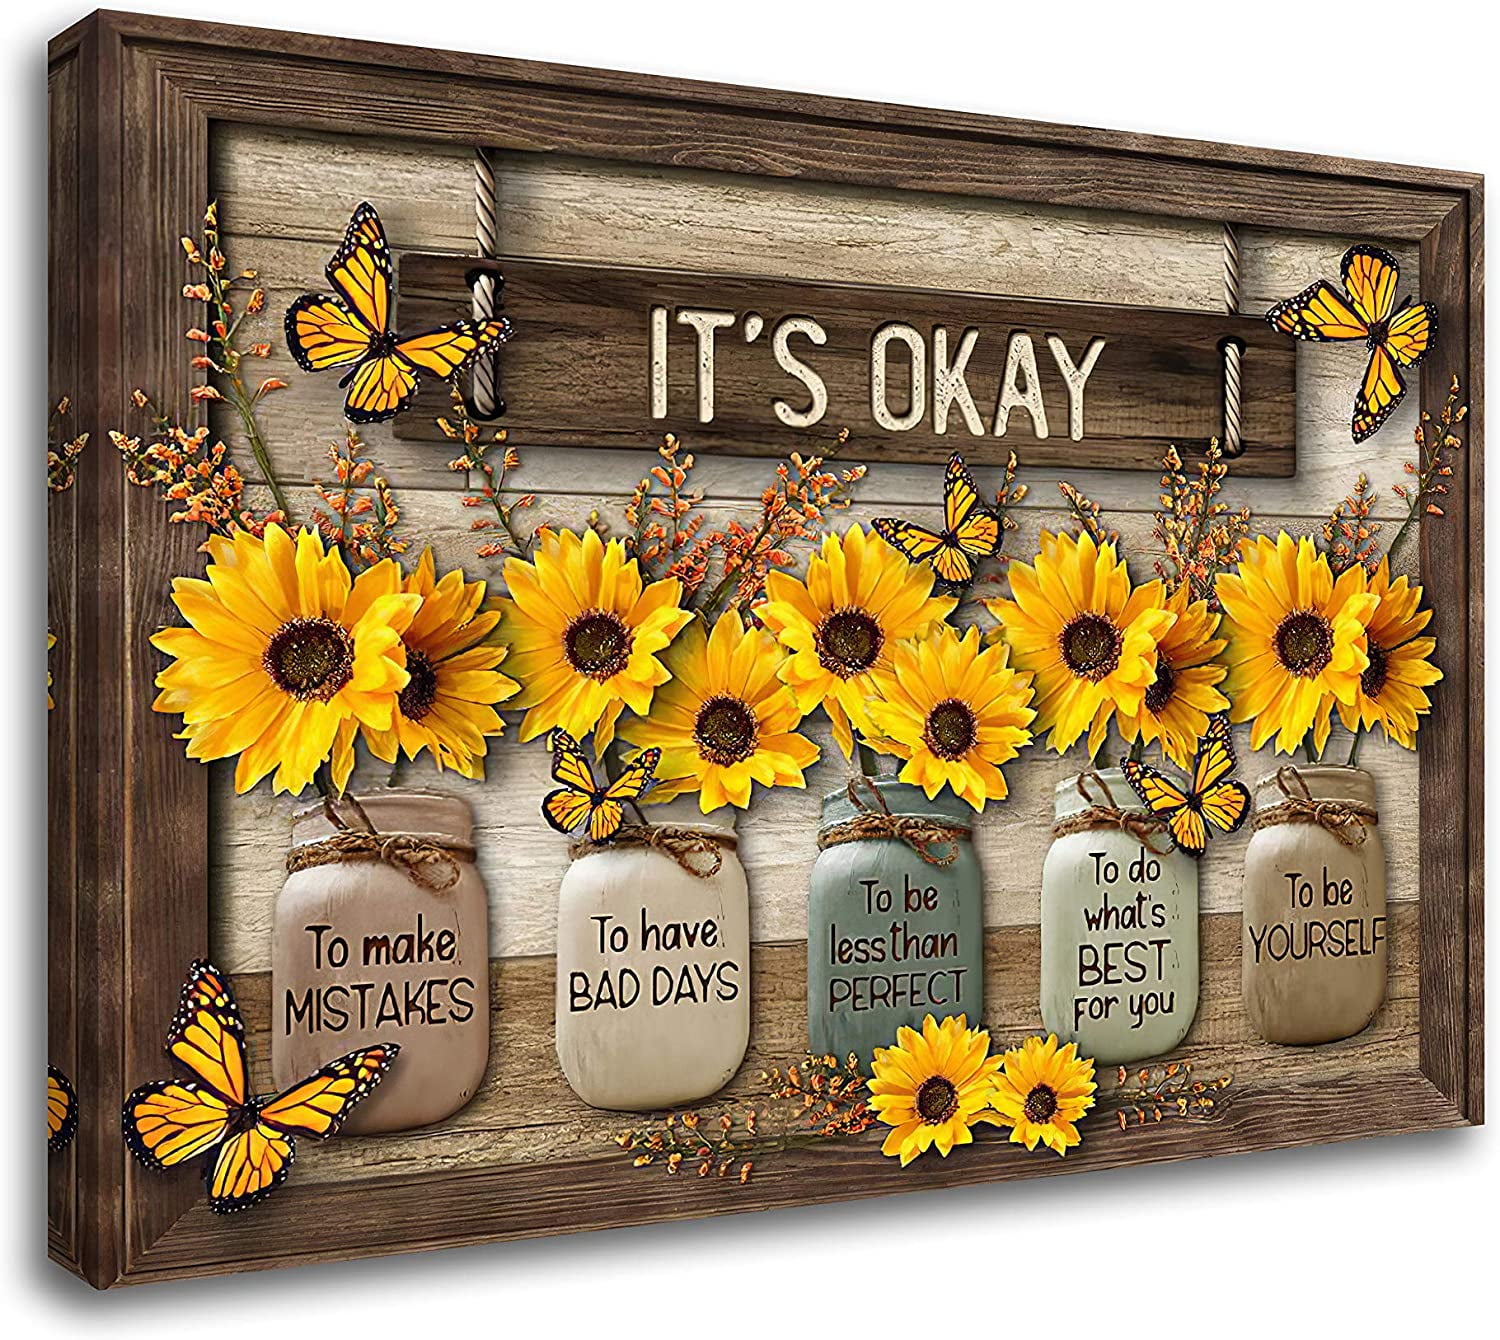 Farmhouse Poster Canvas Prints Sunflower Painting Wall Art for Home Decor 